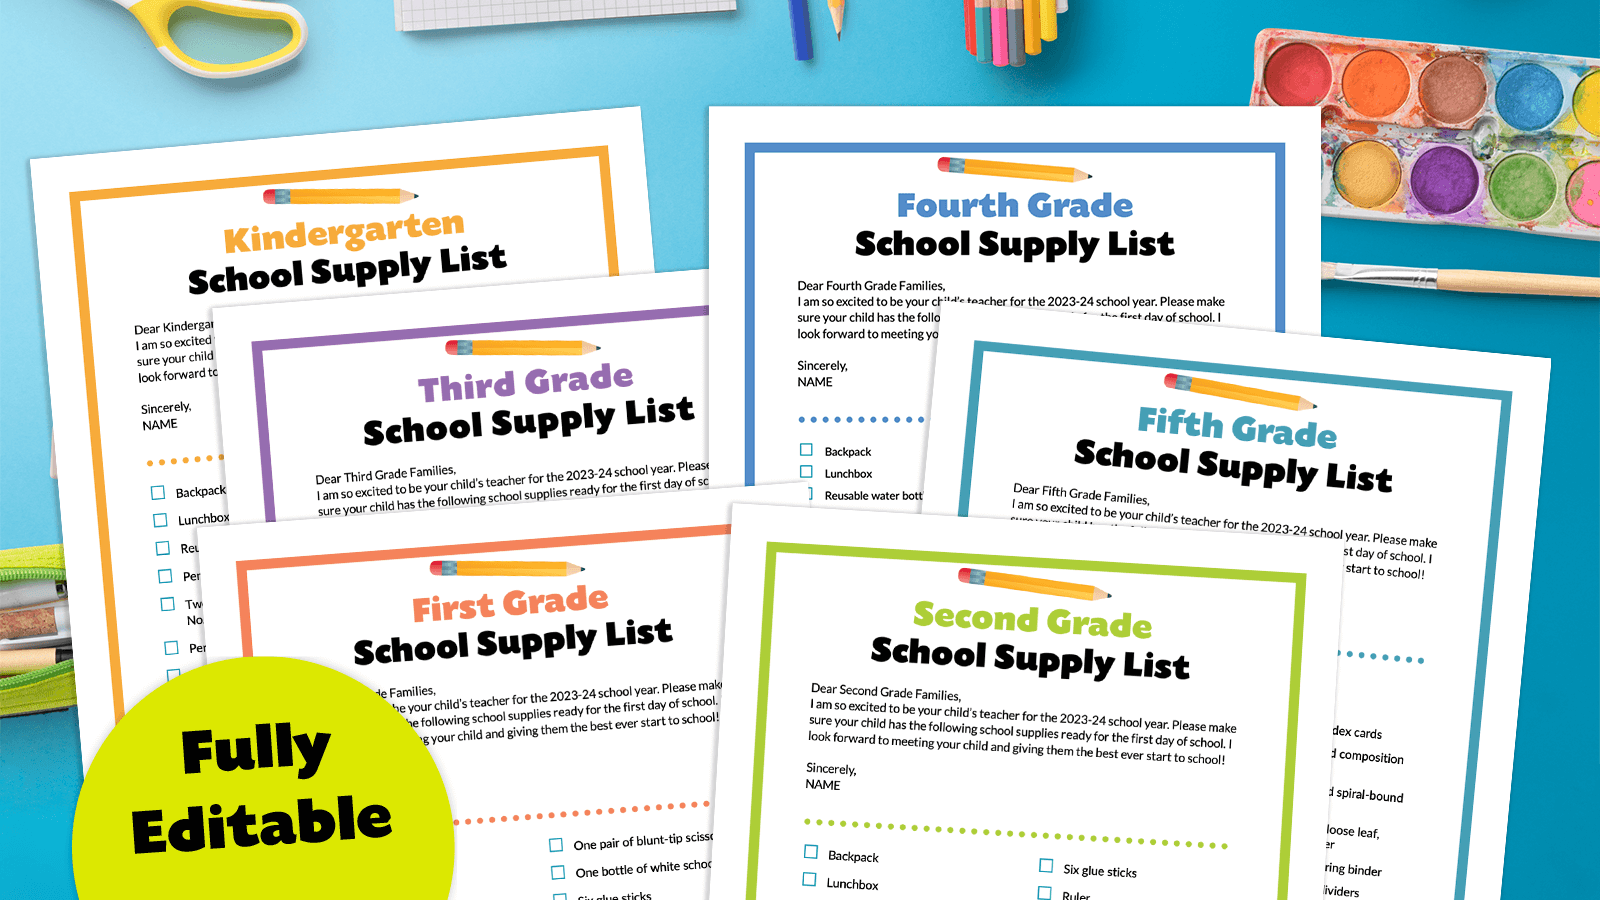 Get These Free School Supply Lists—One for Each Grade K5